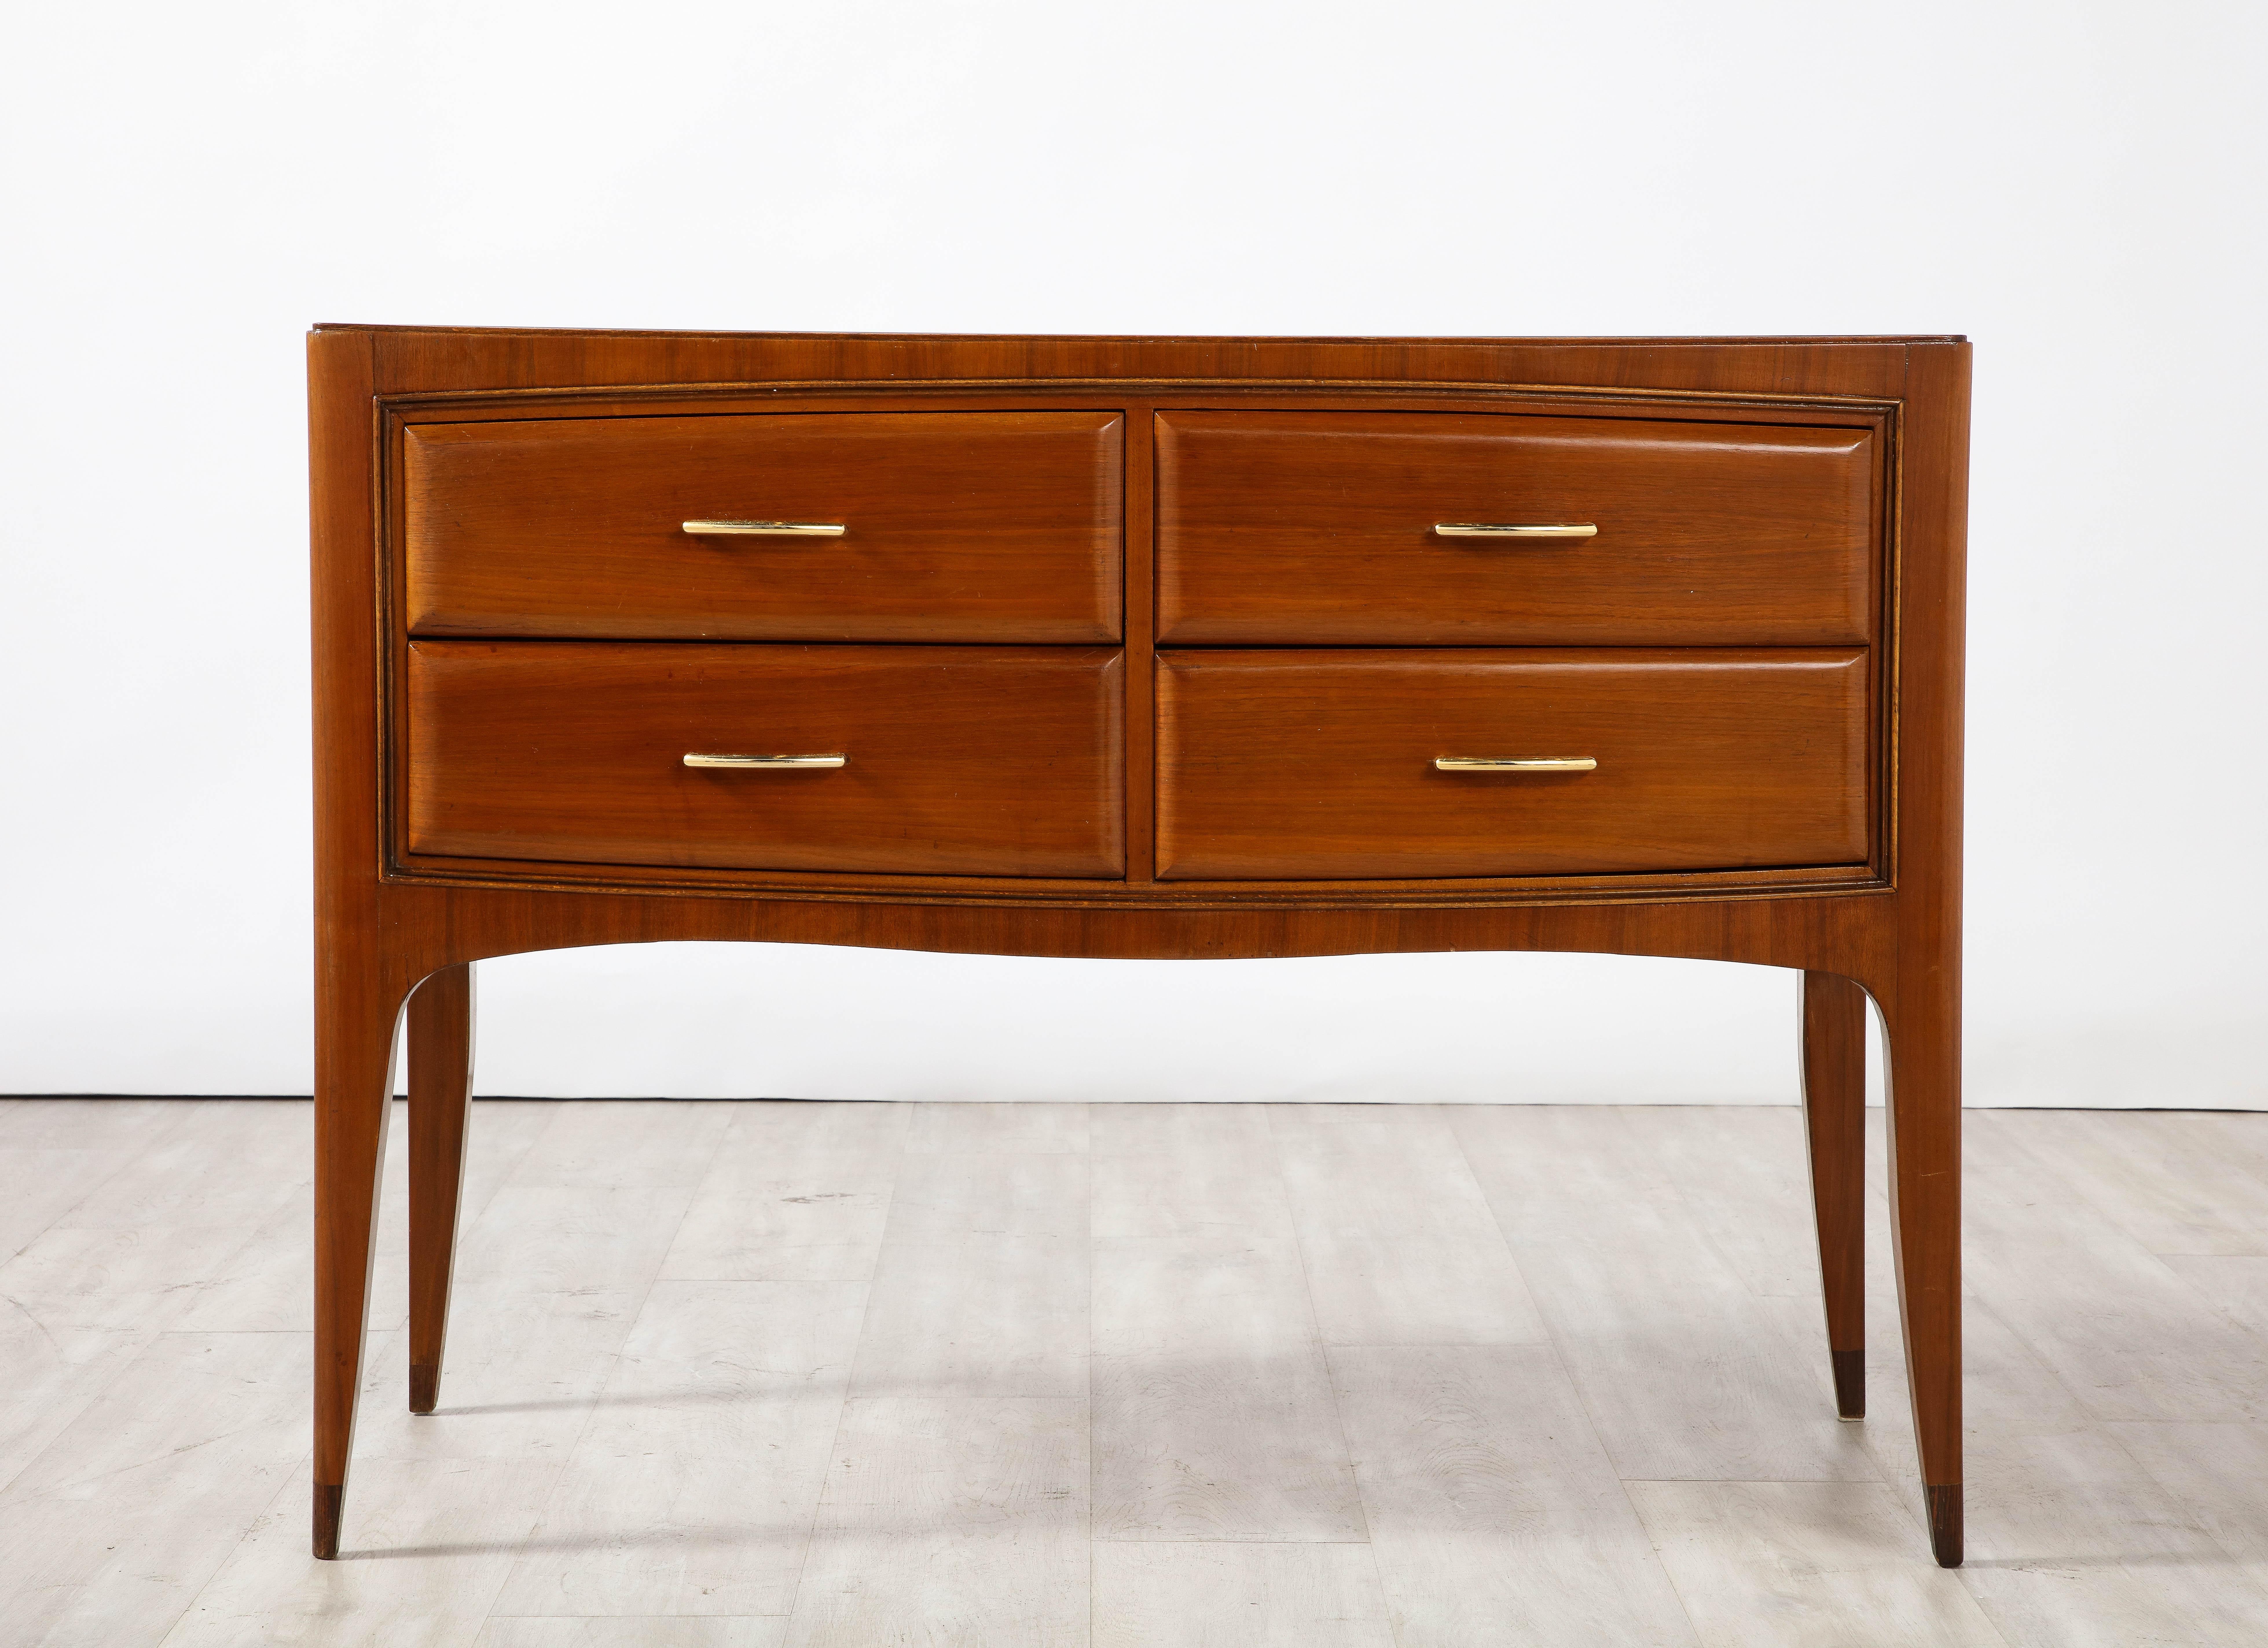 A fine and elegant chest of drawers or commode by Paolo Buffa, circa 1940.  The handsome mahogany case is perfectly proportioned with four horizontal drawers, all with a slight curve with elegant brass horizontal handles which mimic the drawer